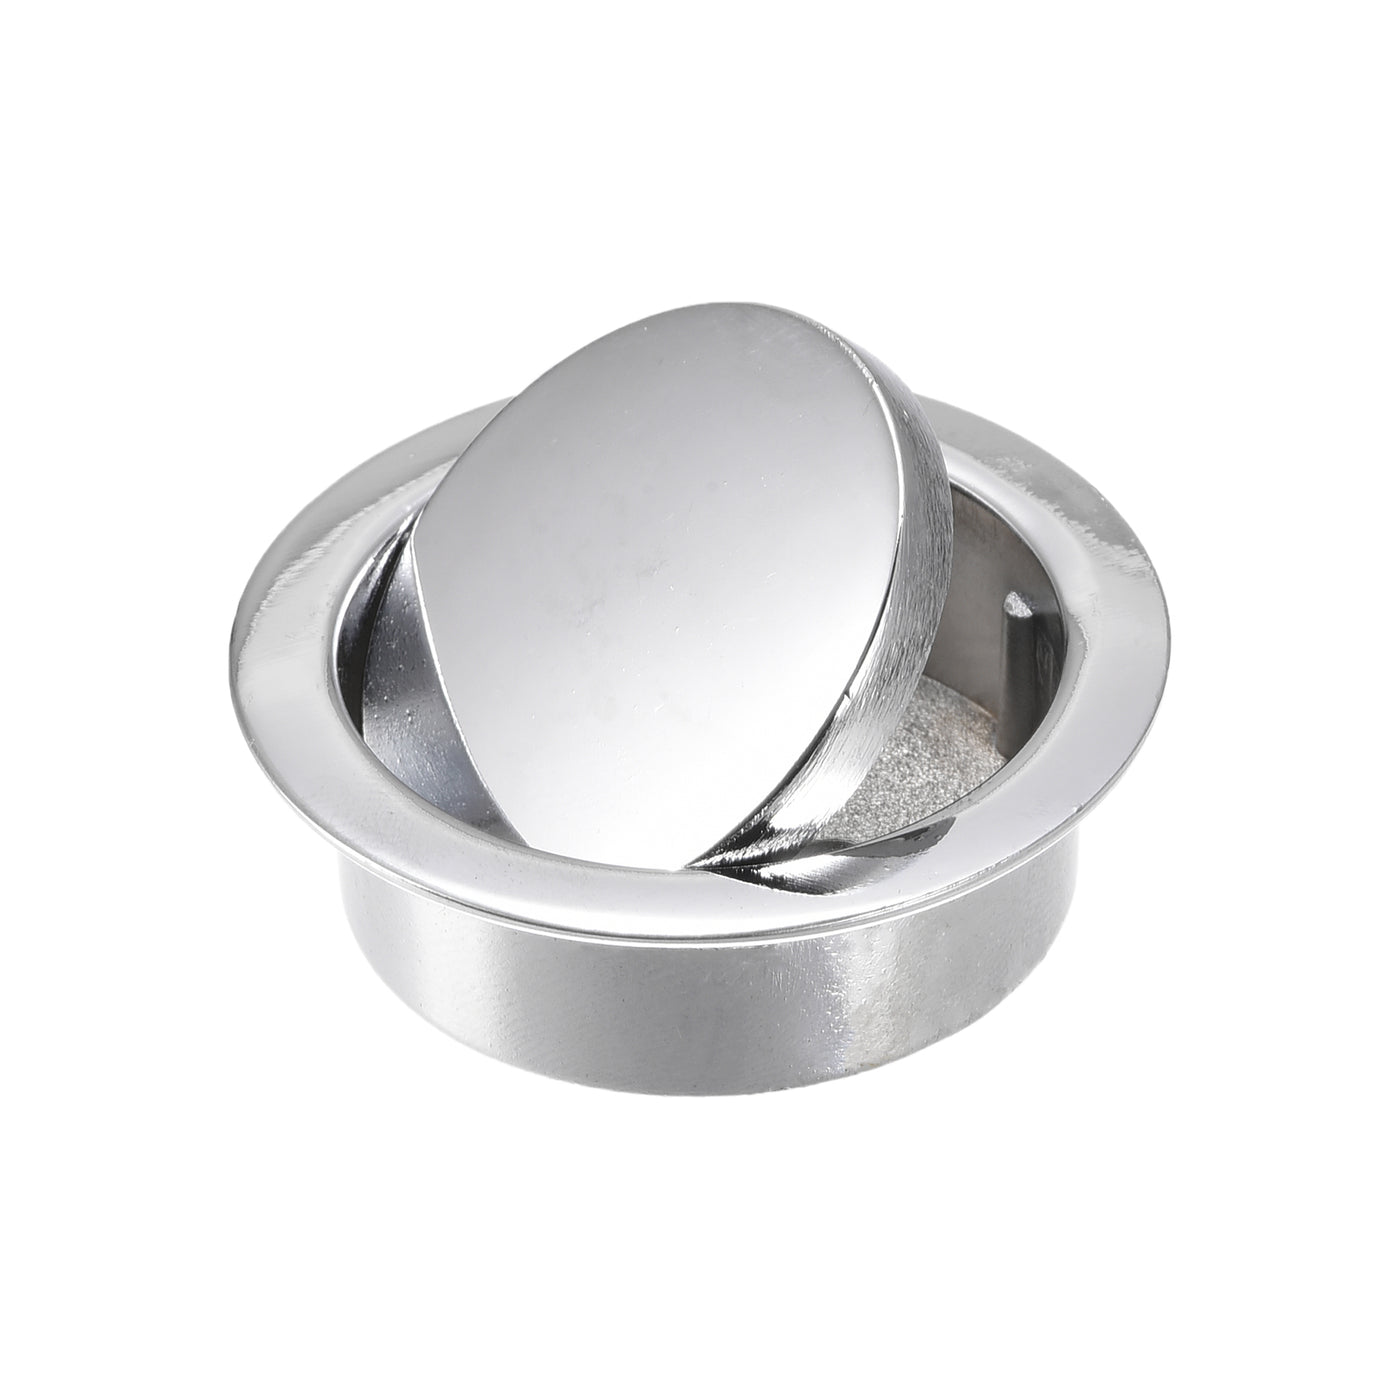 uxcell Uxcell Finger Flush Pull Handle Outer Dia. 42mm/1.65" Bright Silver with Screw